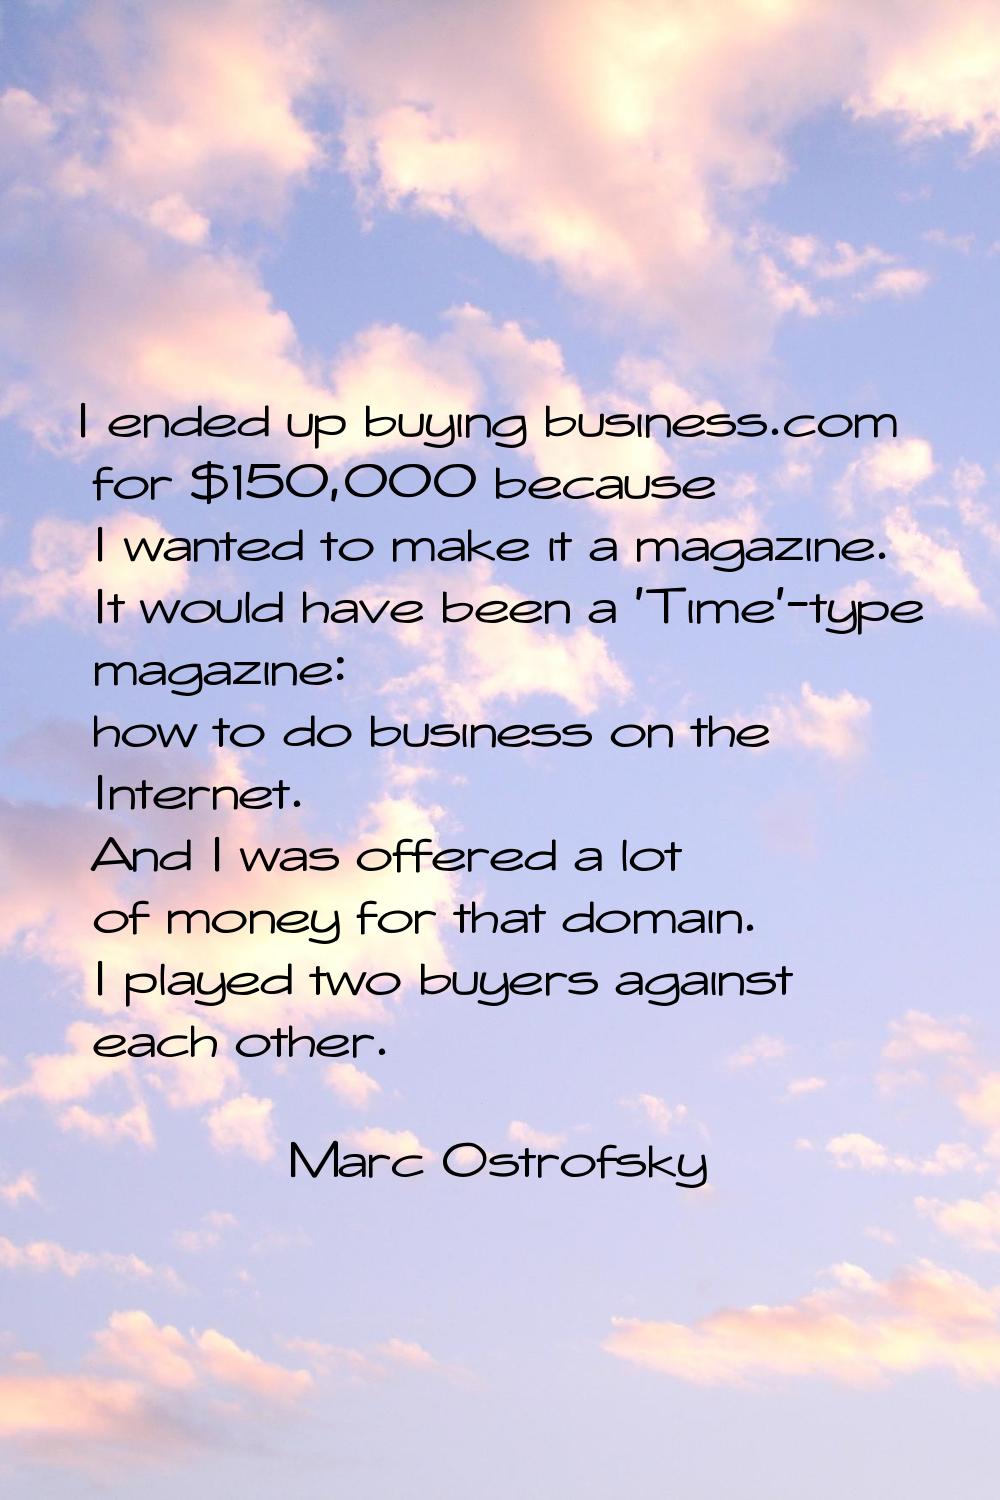 I ended up buying business.com for $150,000 because I wanted to make it a magazine. It would have b